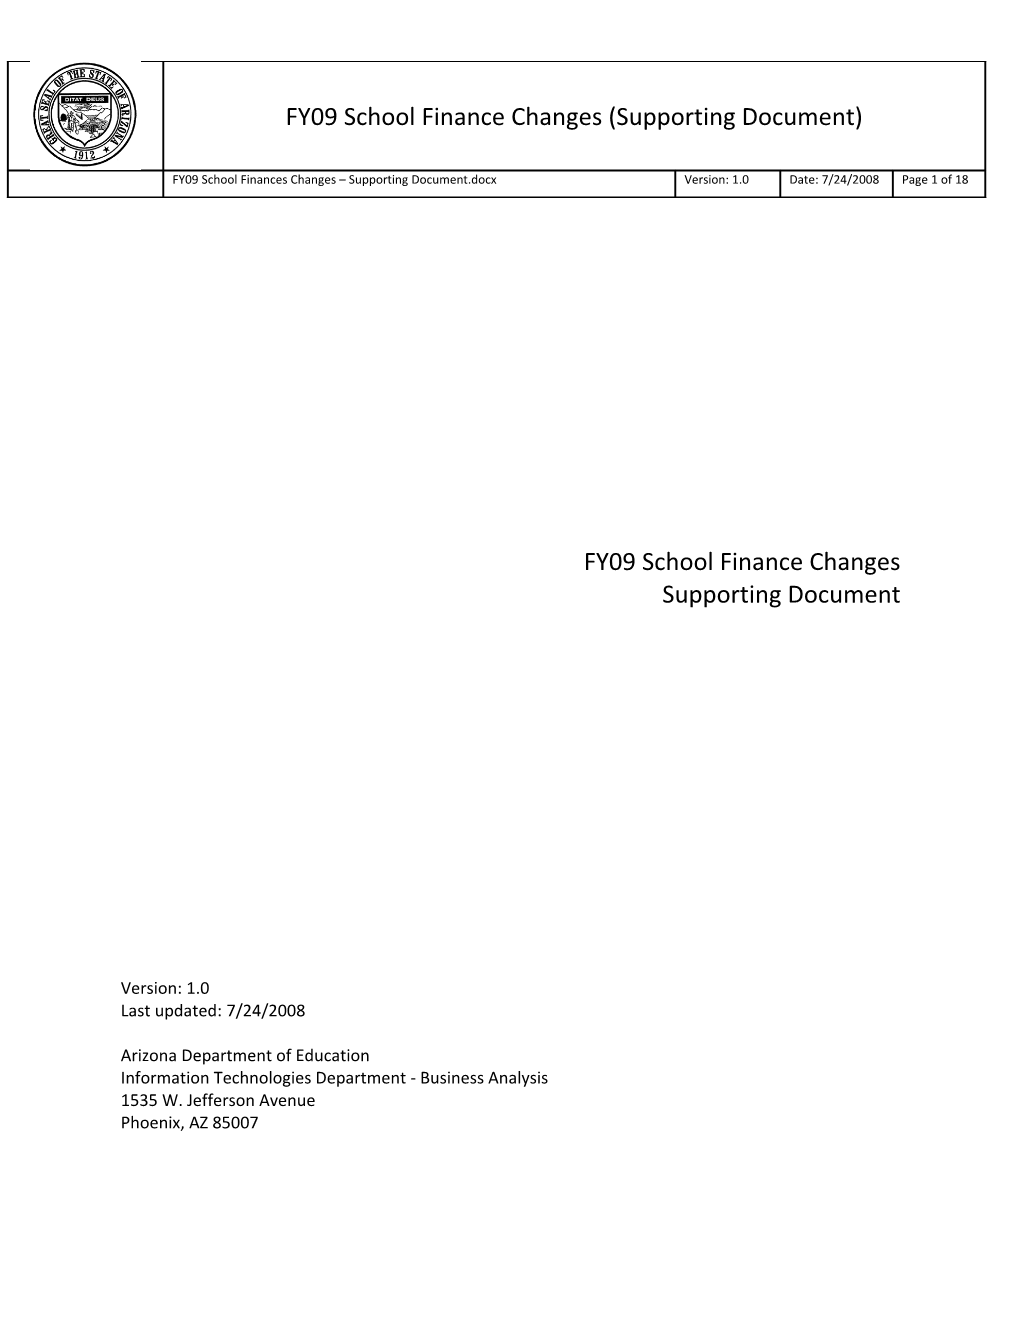 FY09 SEI Budget Change Requests - Preliminary